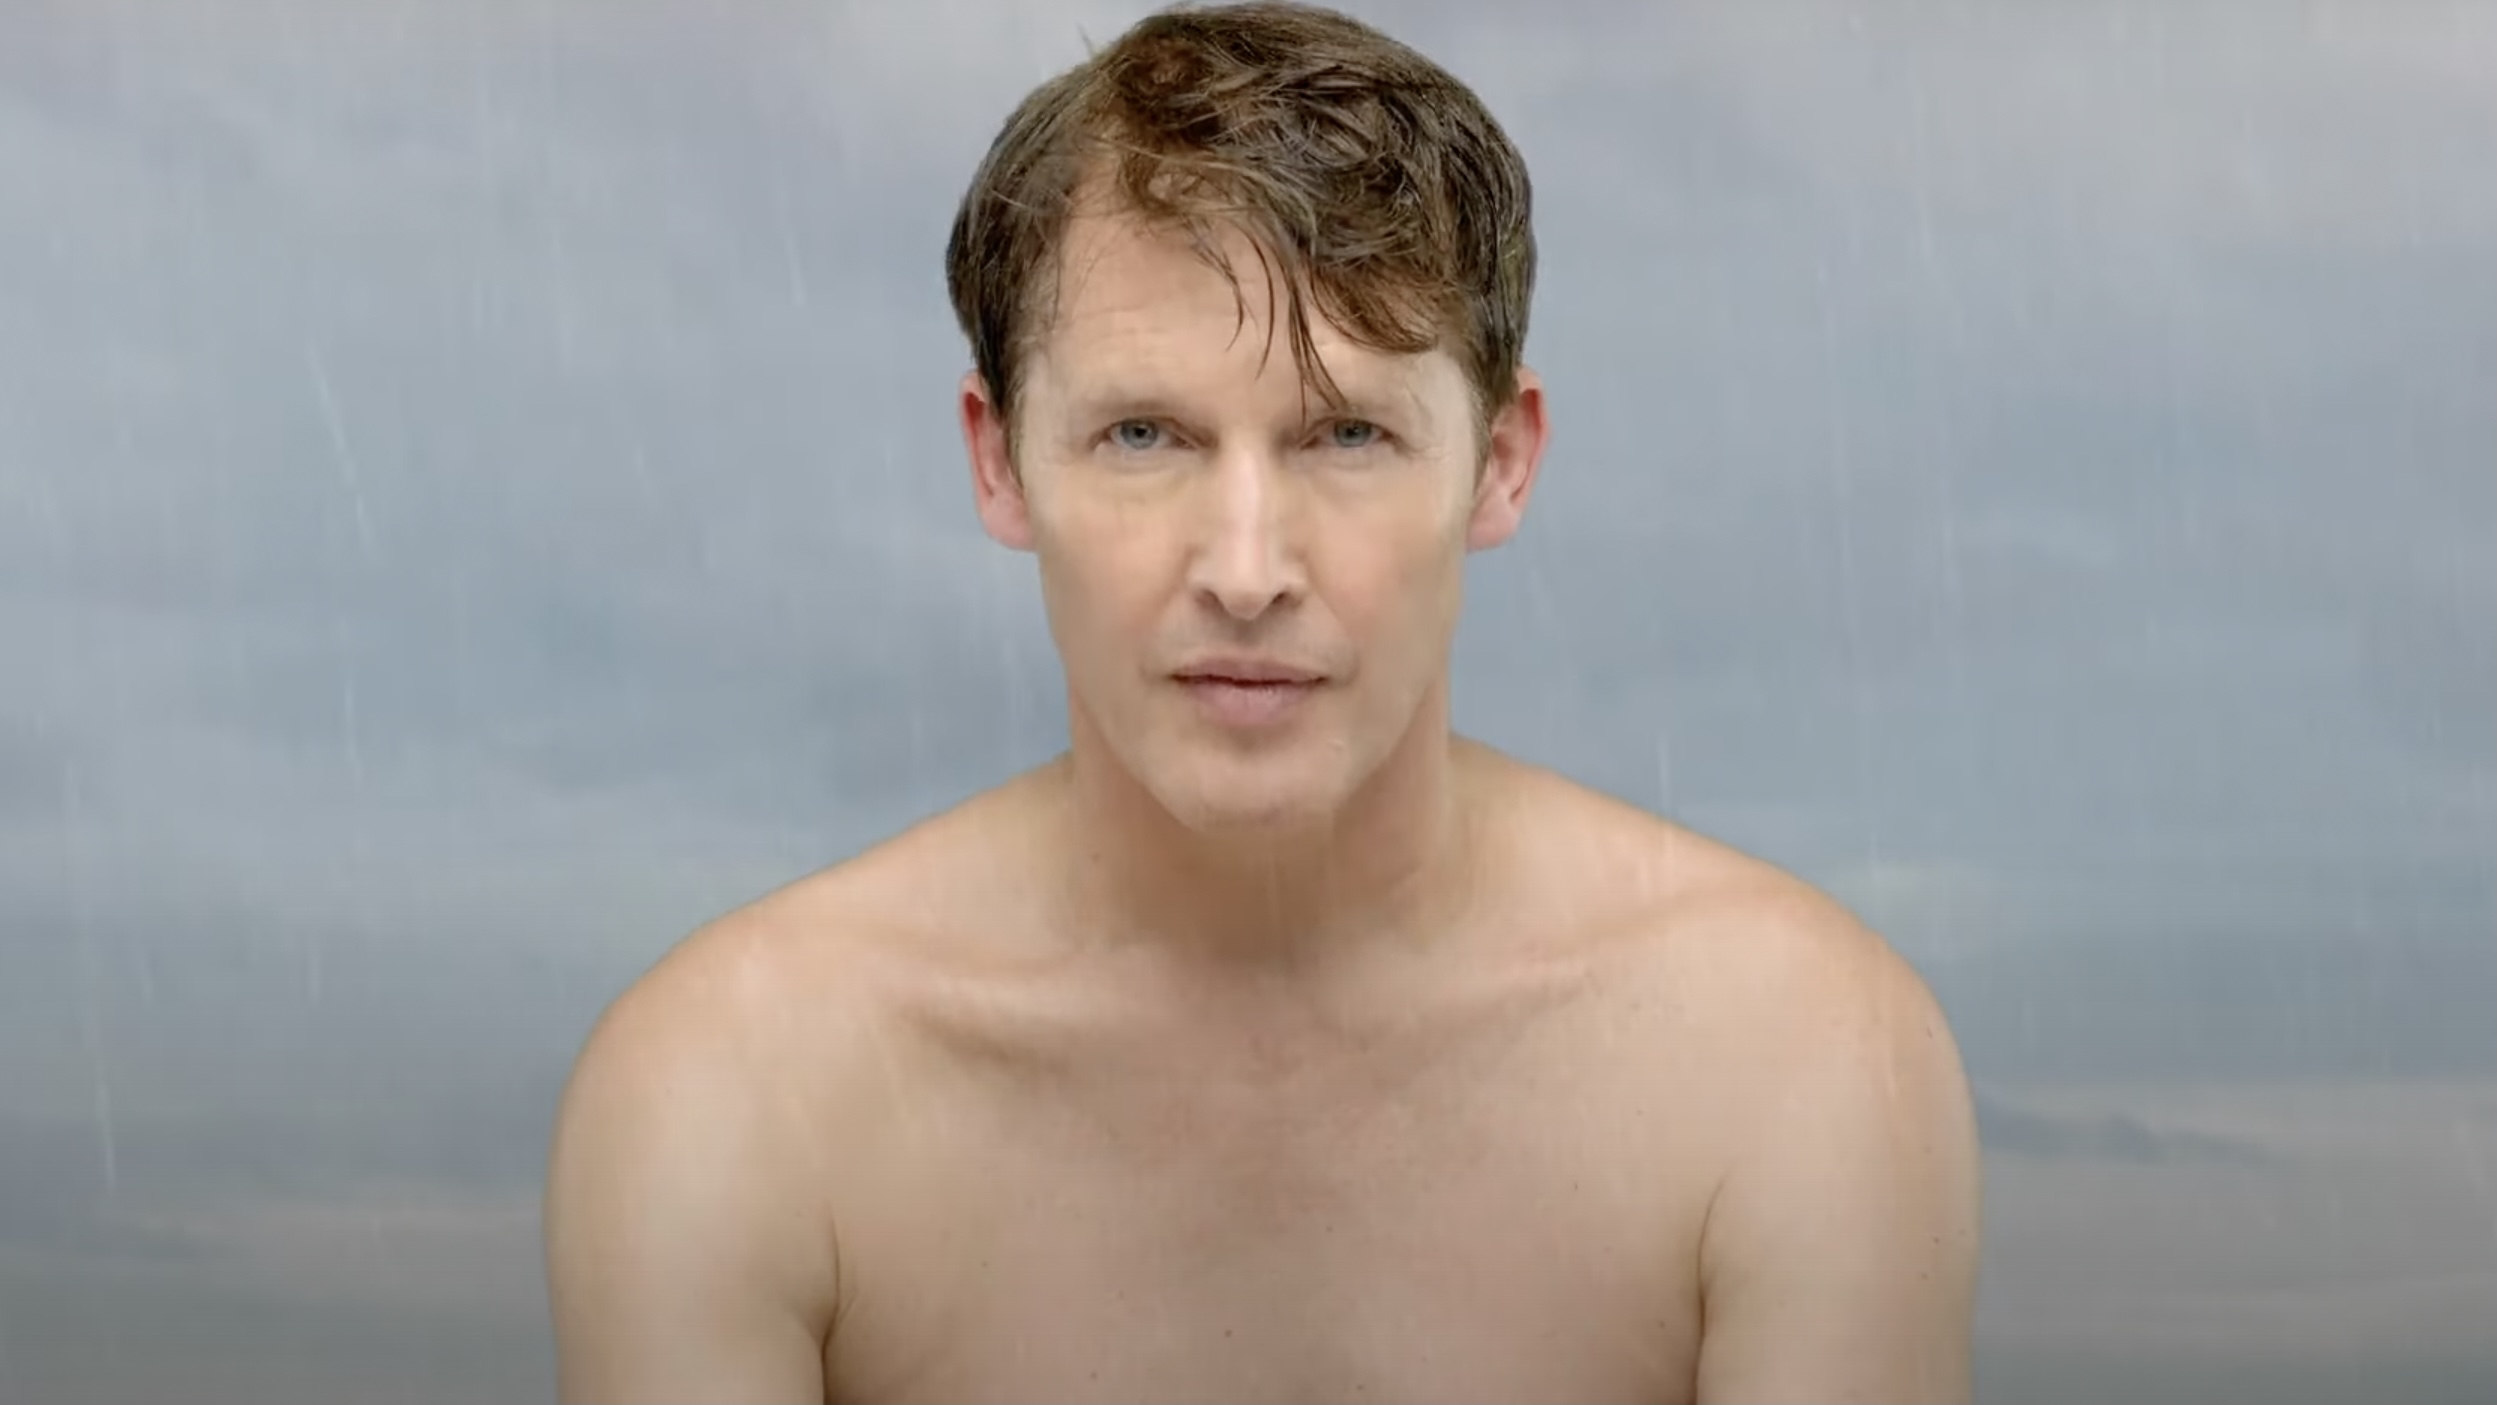 James Blunt recreates iconic 'You're Beautiful' music video for 'Stand Up  To Cancer' - RETROPOP